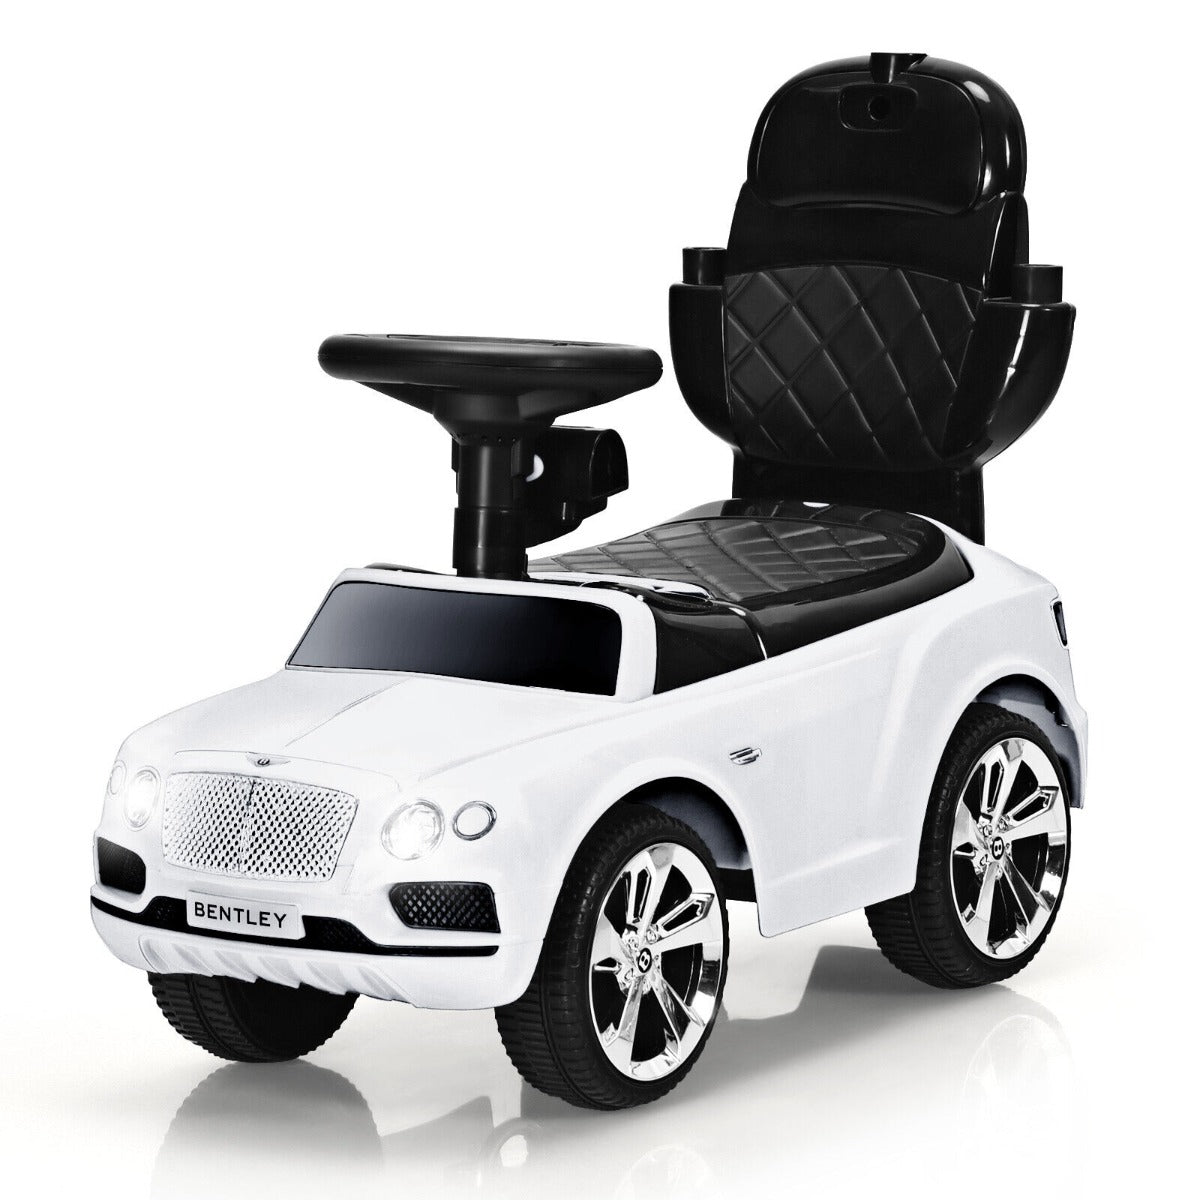 Licensed Bentley Ride-On Push Car with Canopy - White - Child's Toy